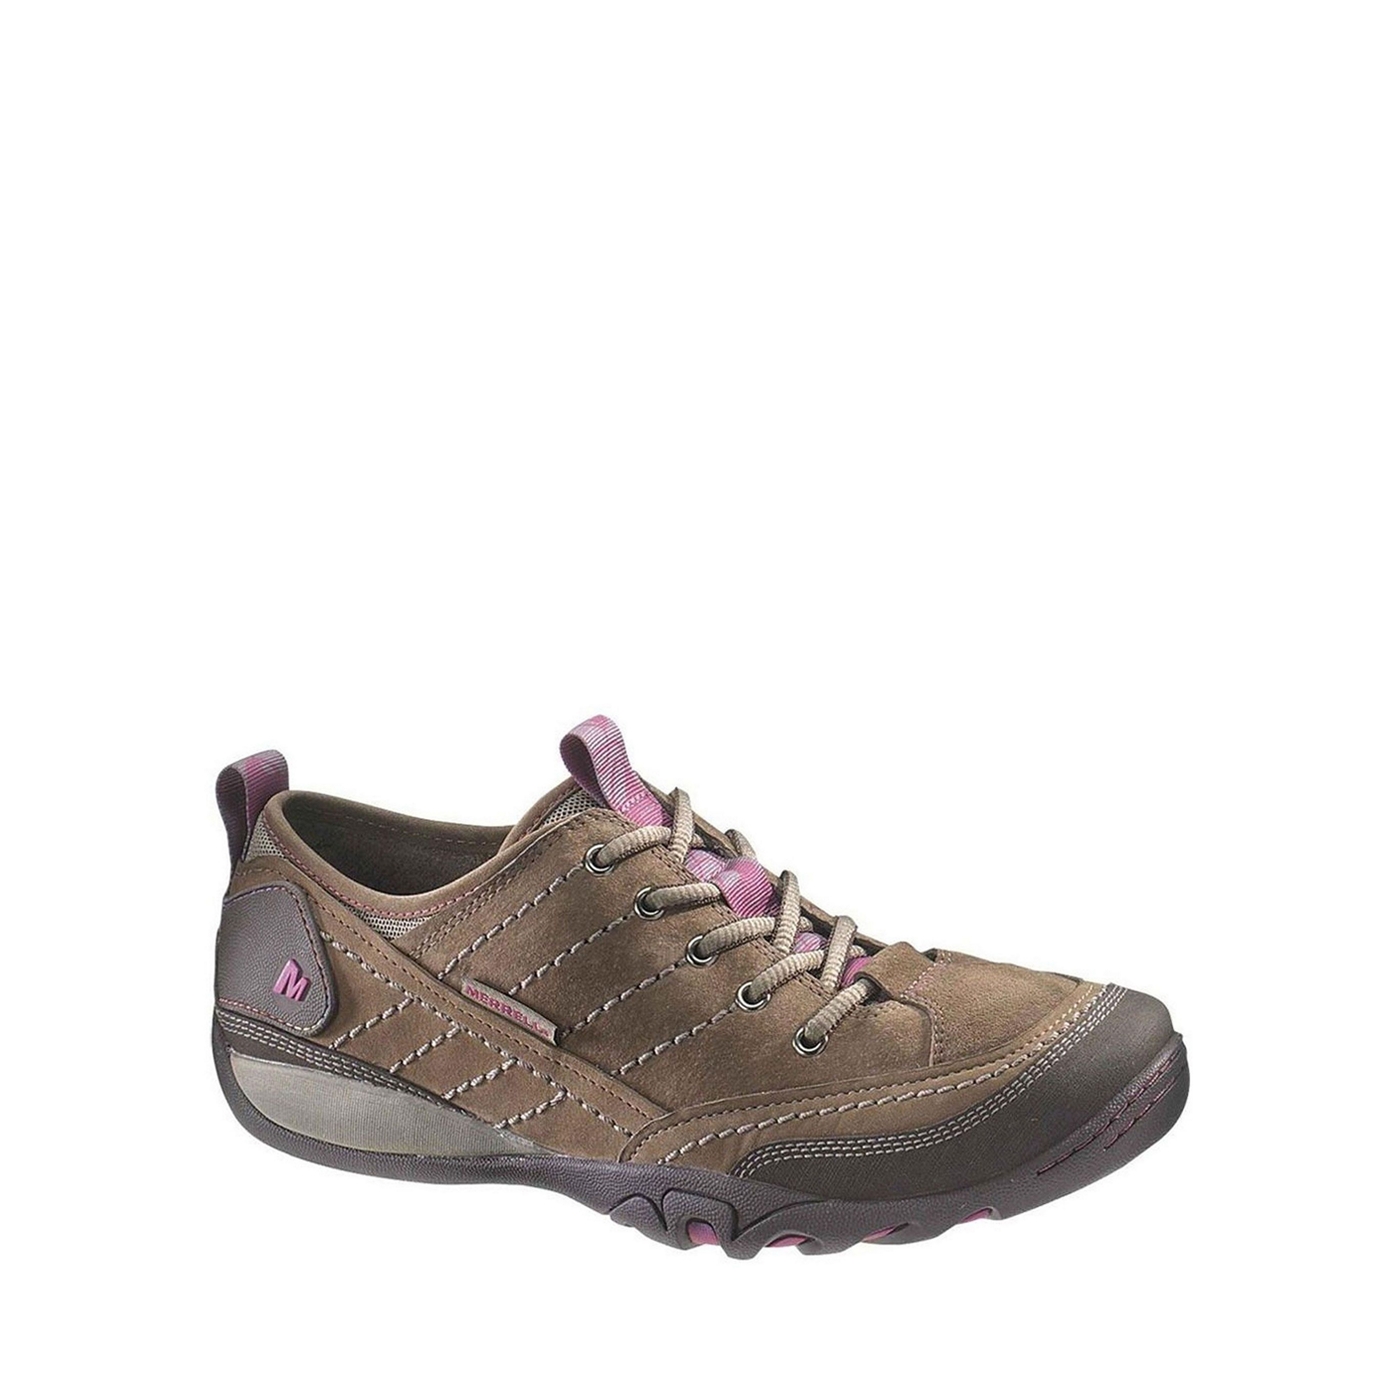 Merrell Brown Mimosa Womens Lace Up Casual Shoes